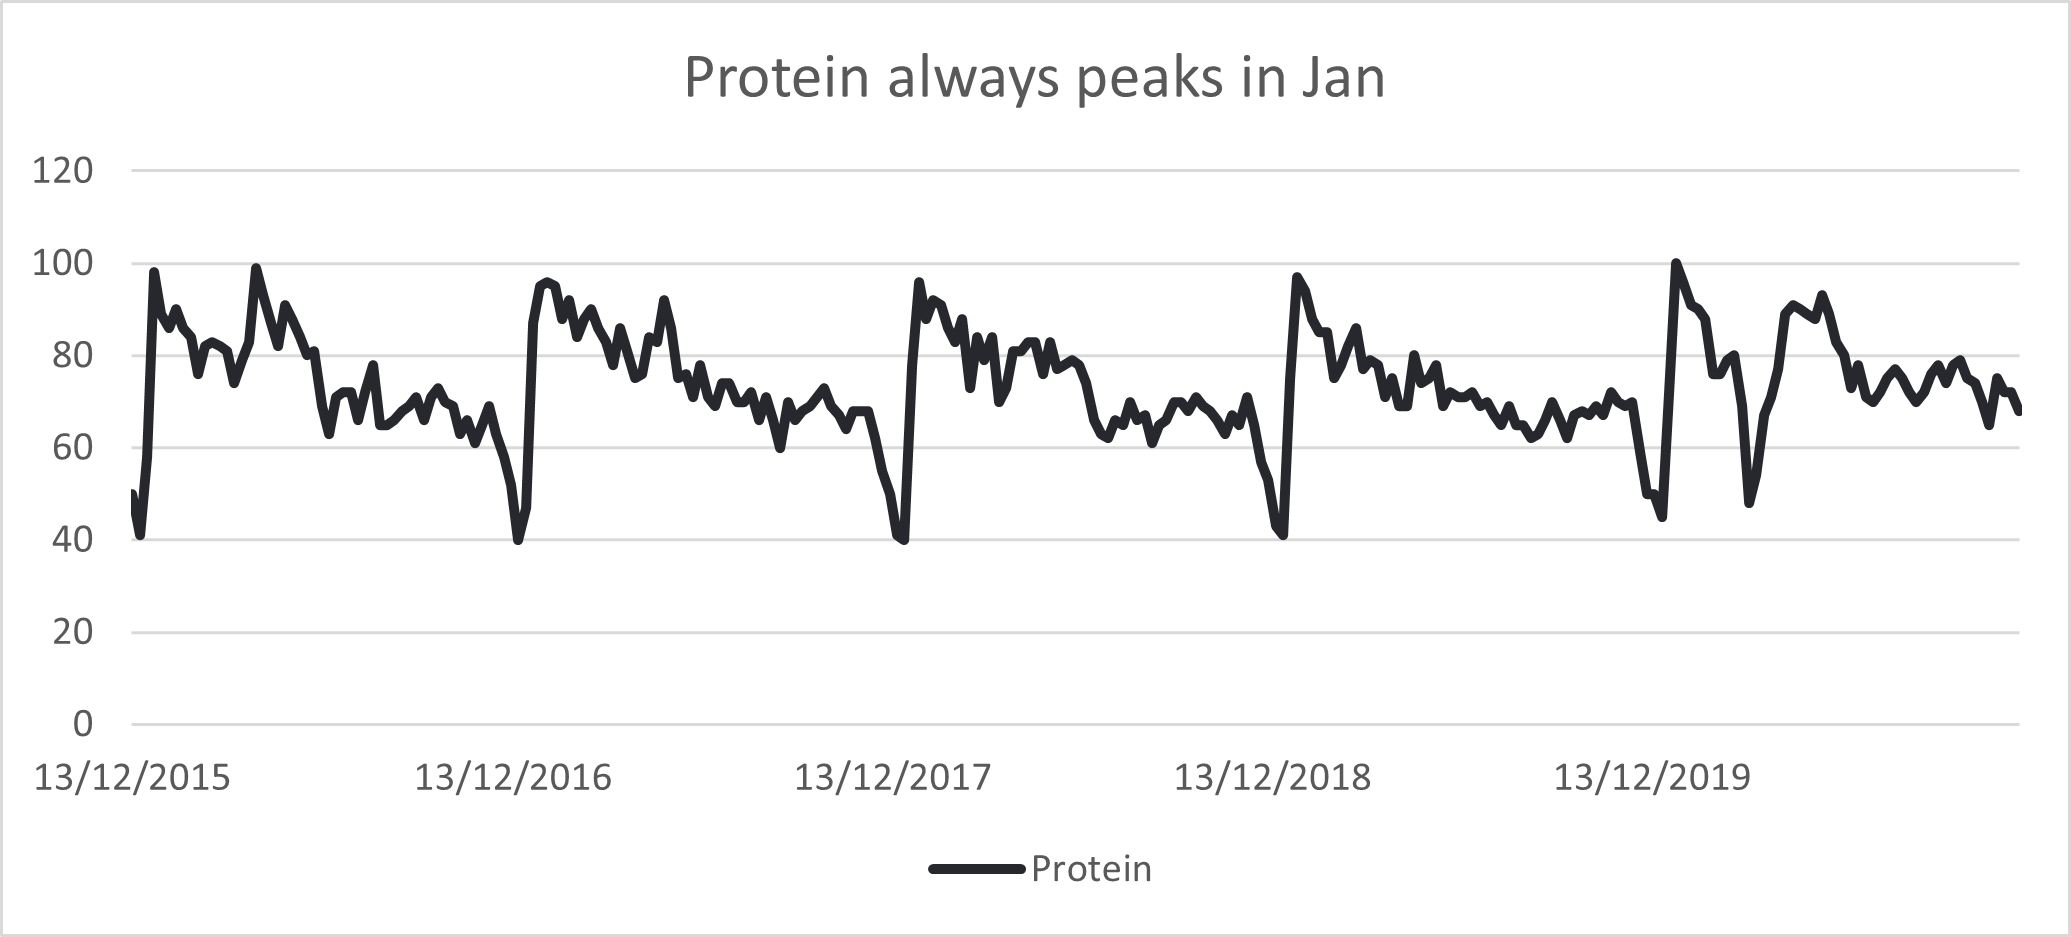 Protein searches increase